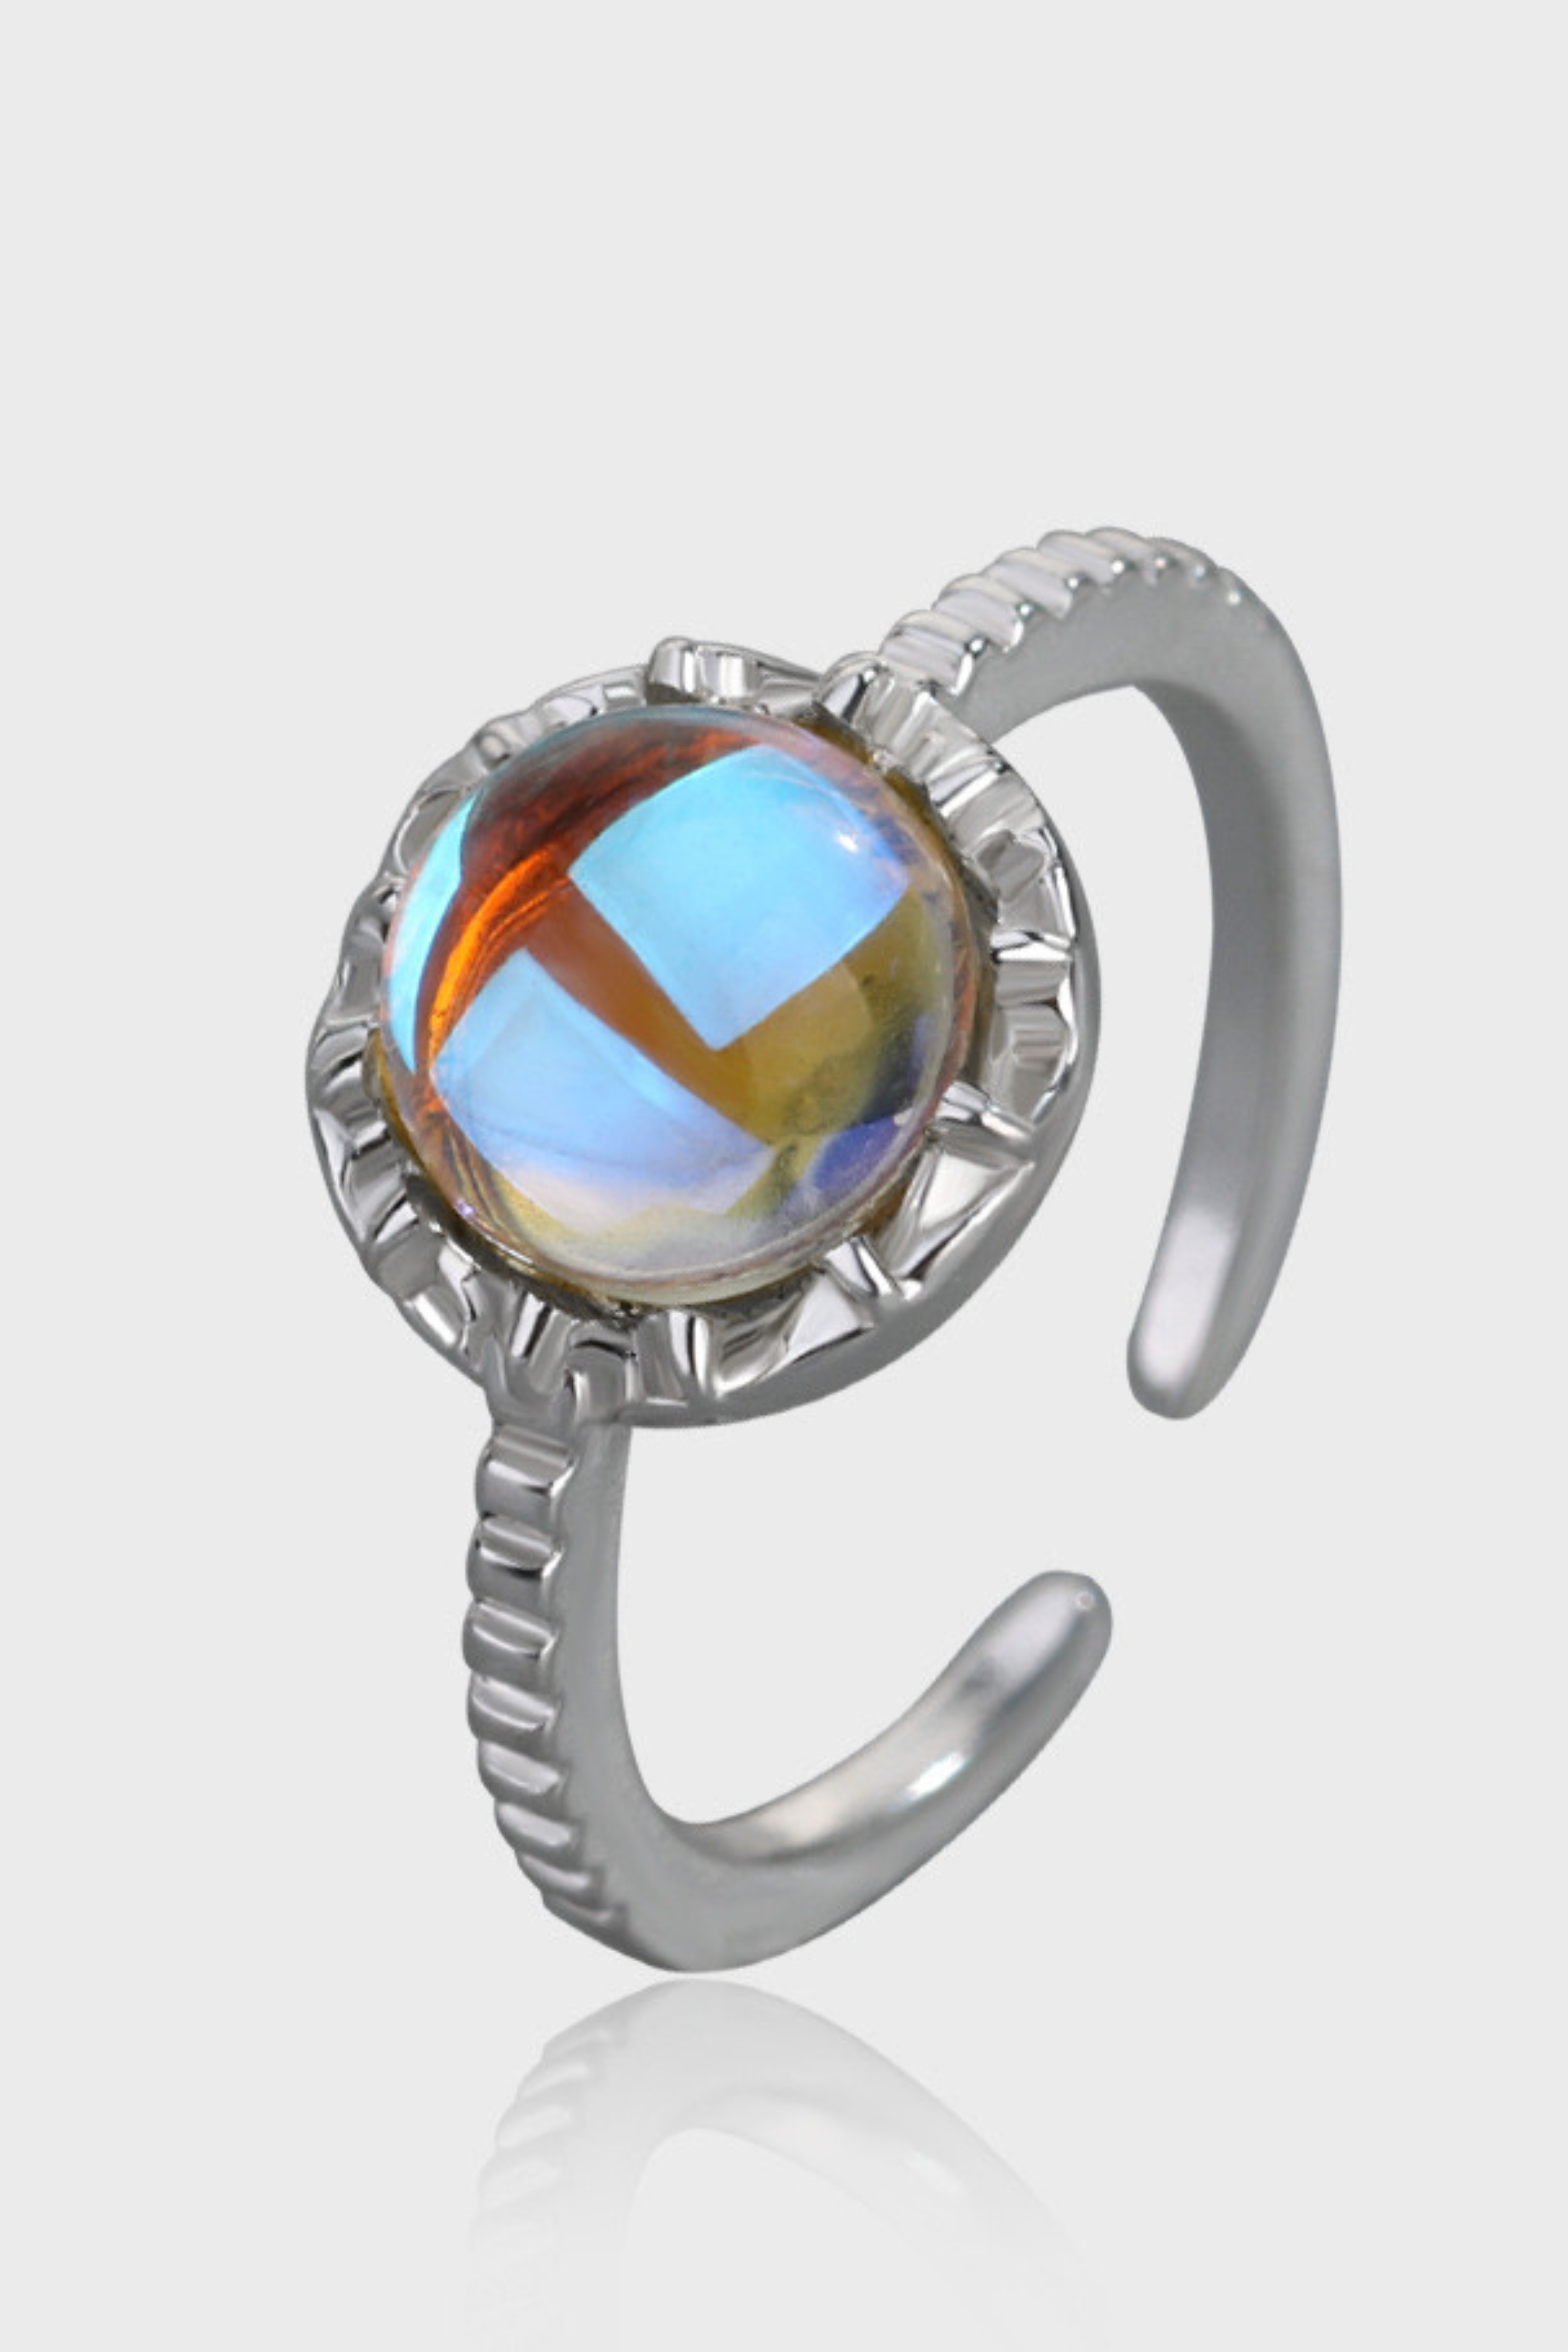 Moonstone Round Silver Ring